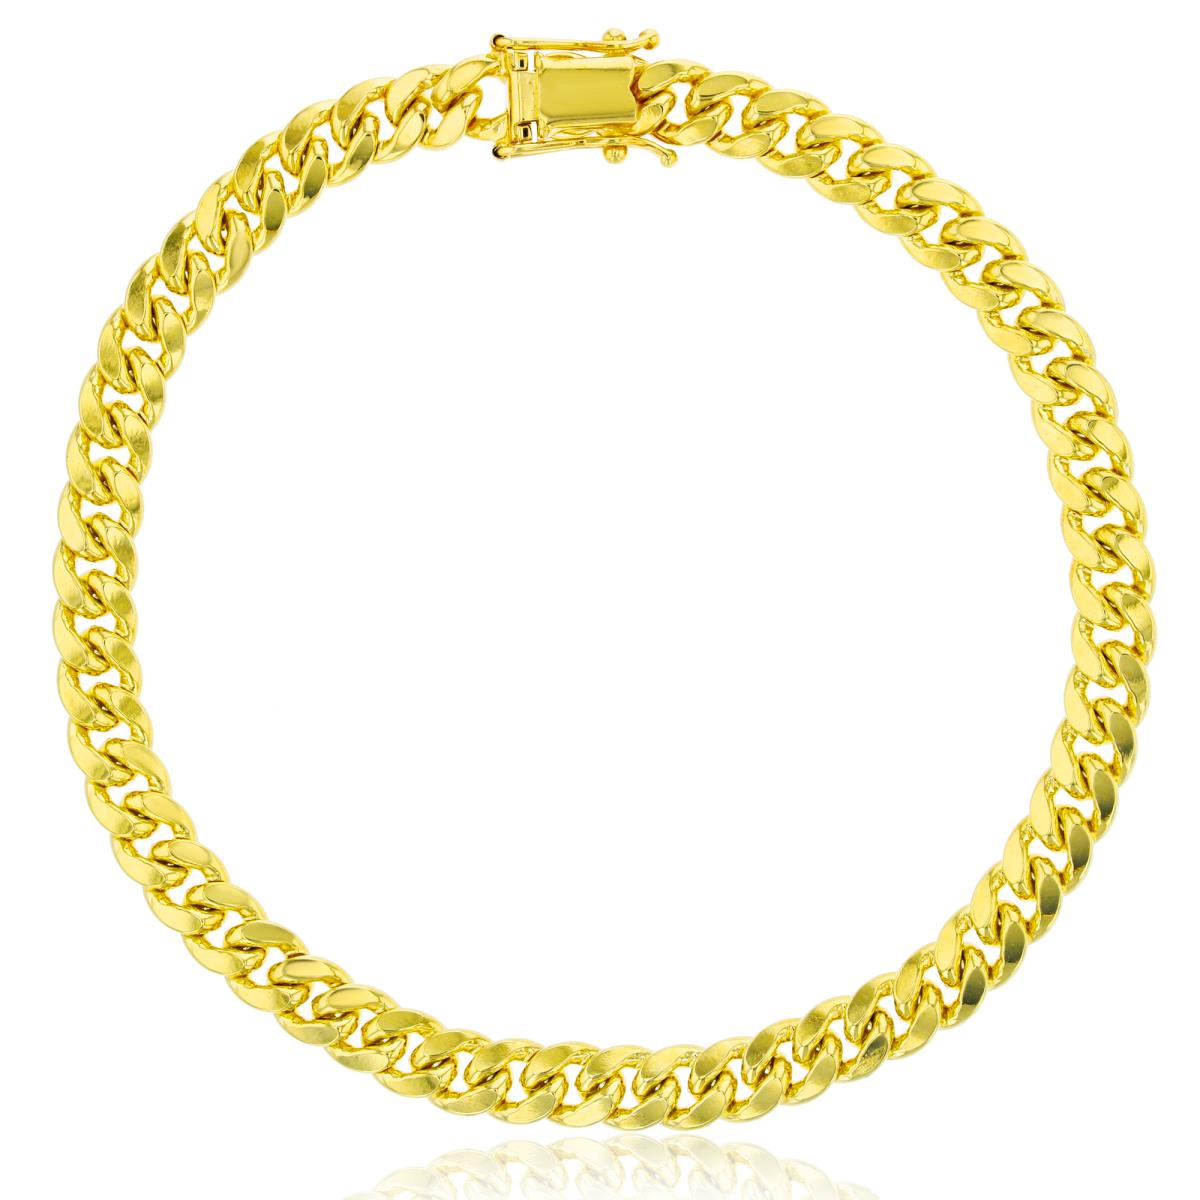 14K Yellow Gold 8.5" 160 Solid Miami Cuban Chain with Box Lock